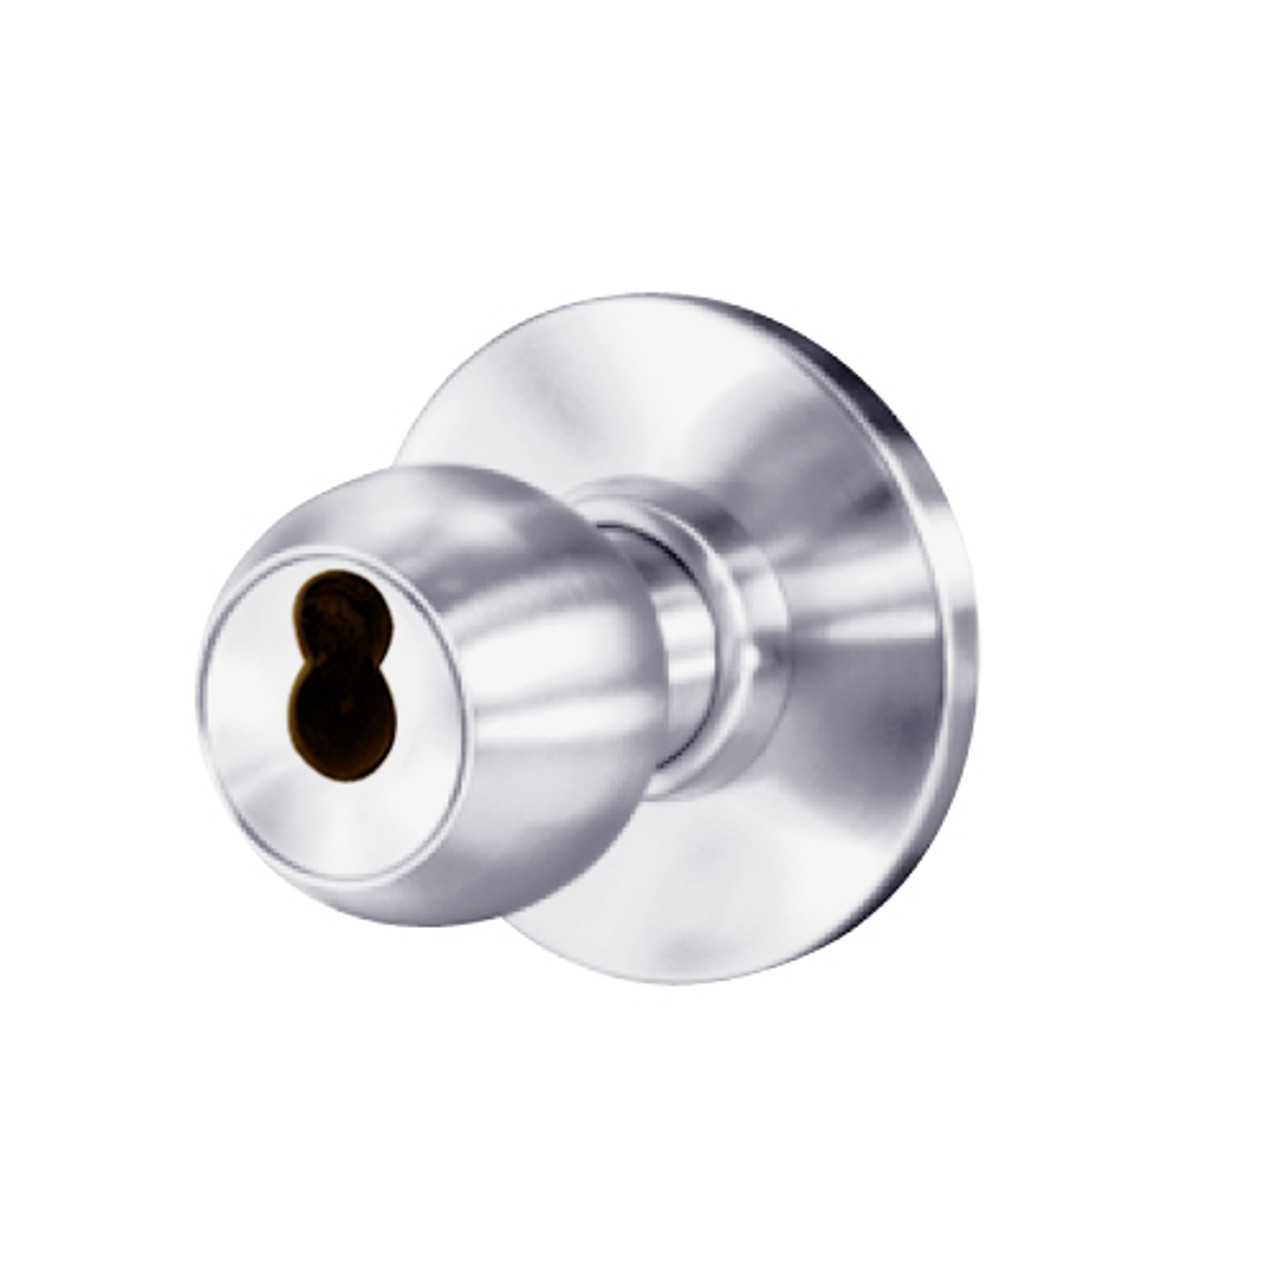 8K57YD4AS3626 Best 8K Series Exit Heavy Duty Cylindrical Knob Locks with Round Style in Satin Chrome